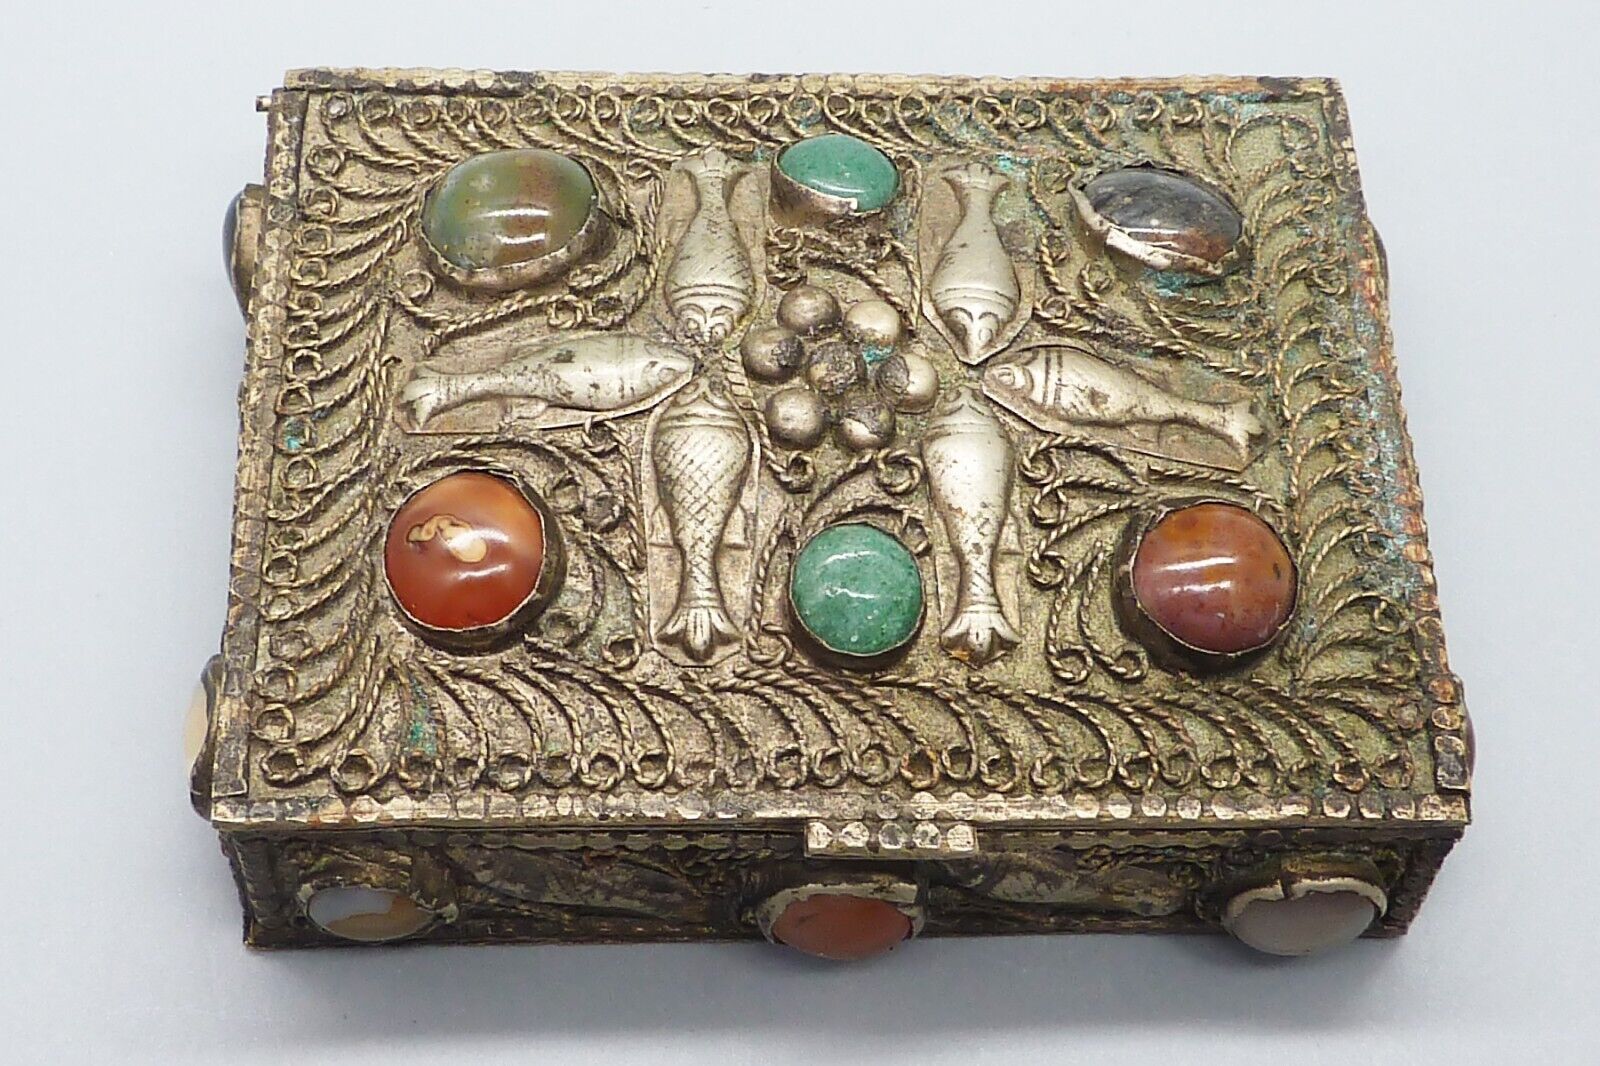 Vintage Handmade Silver Metal Trinket Box with Polished Stone Accents